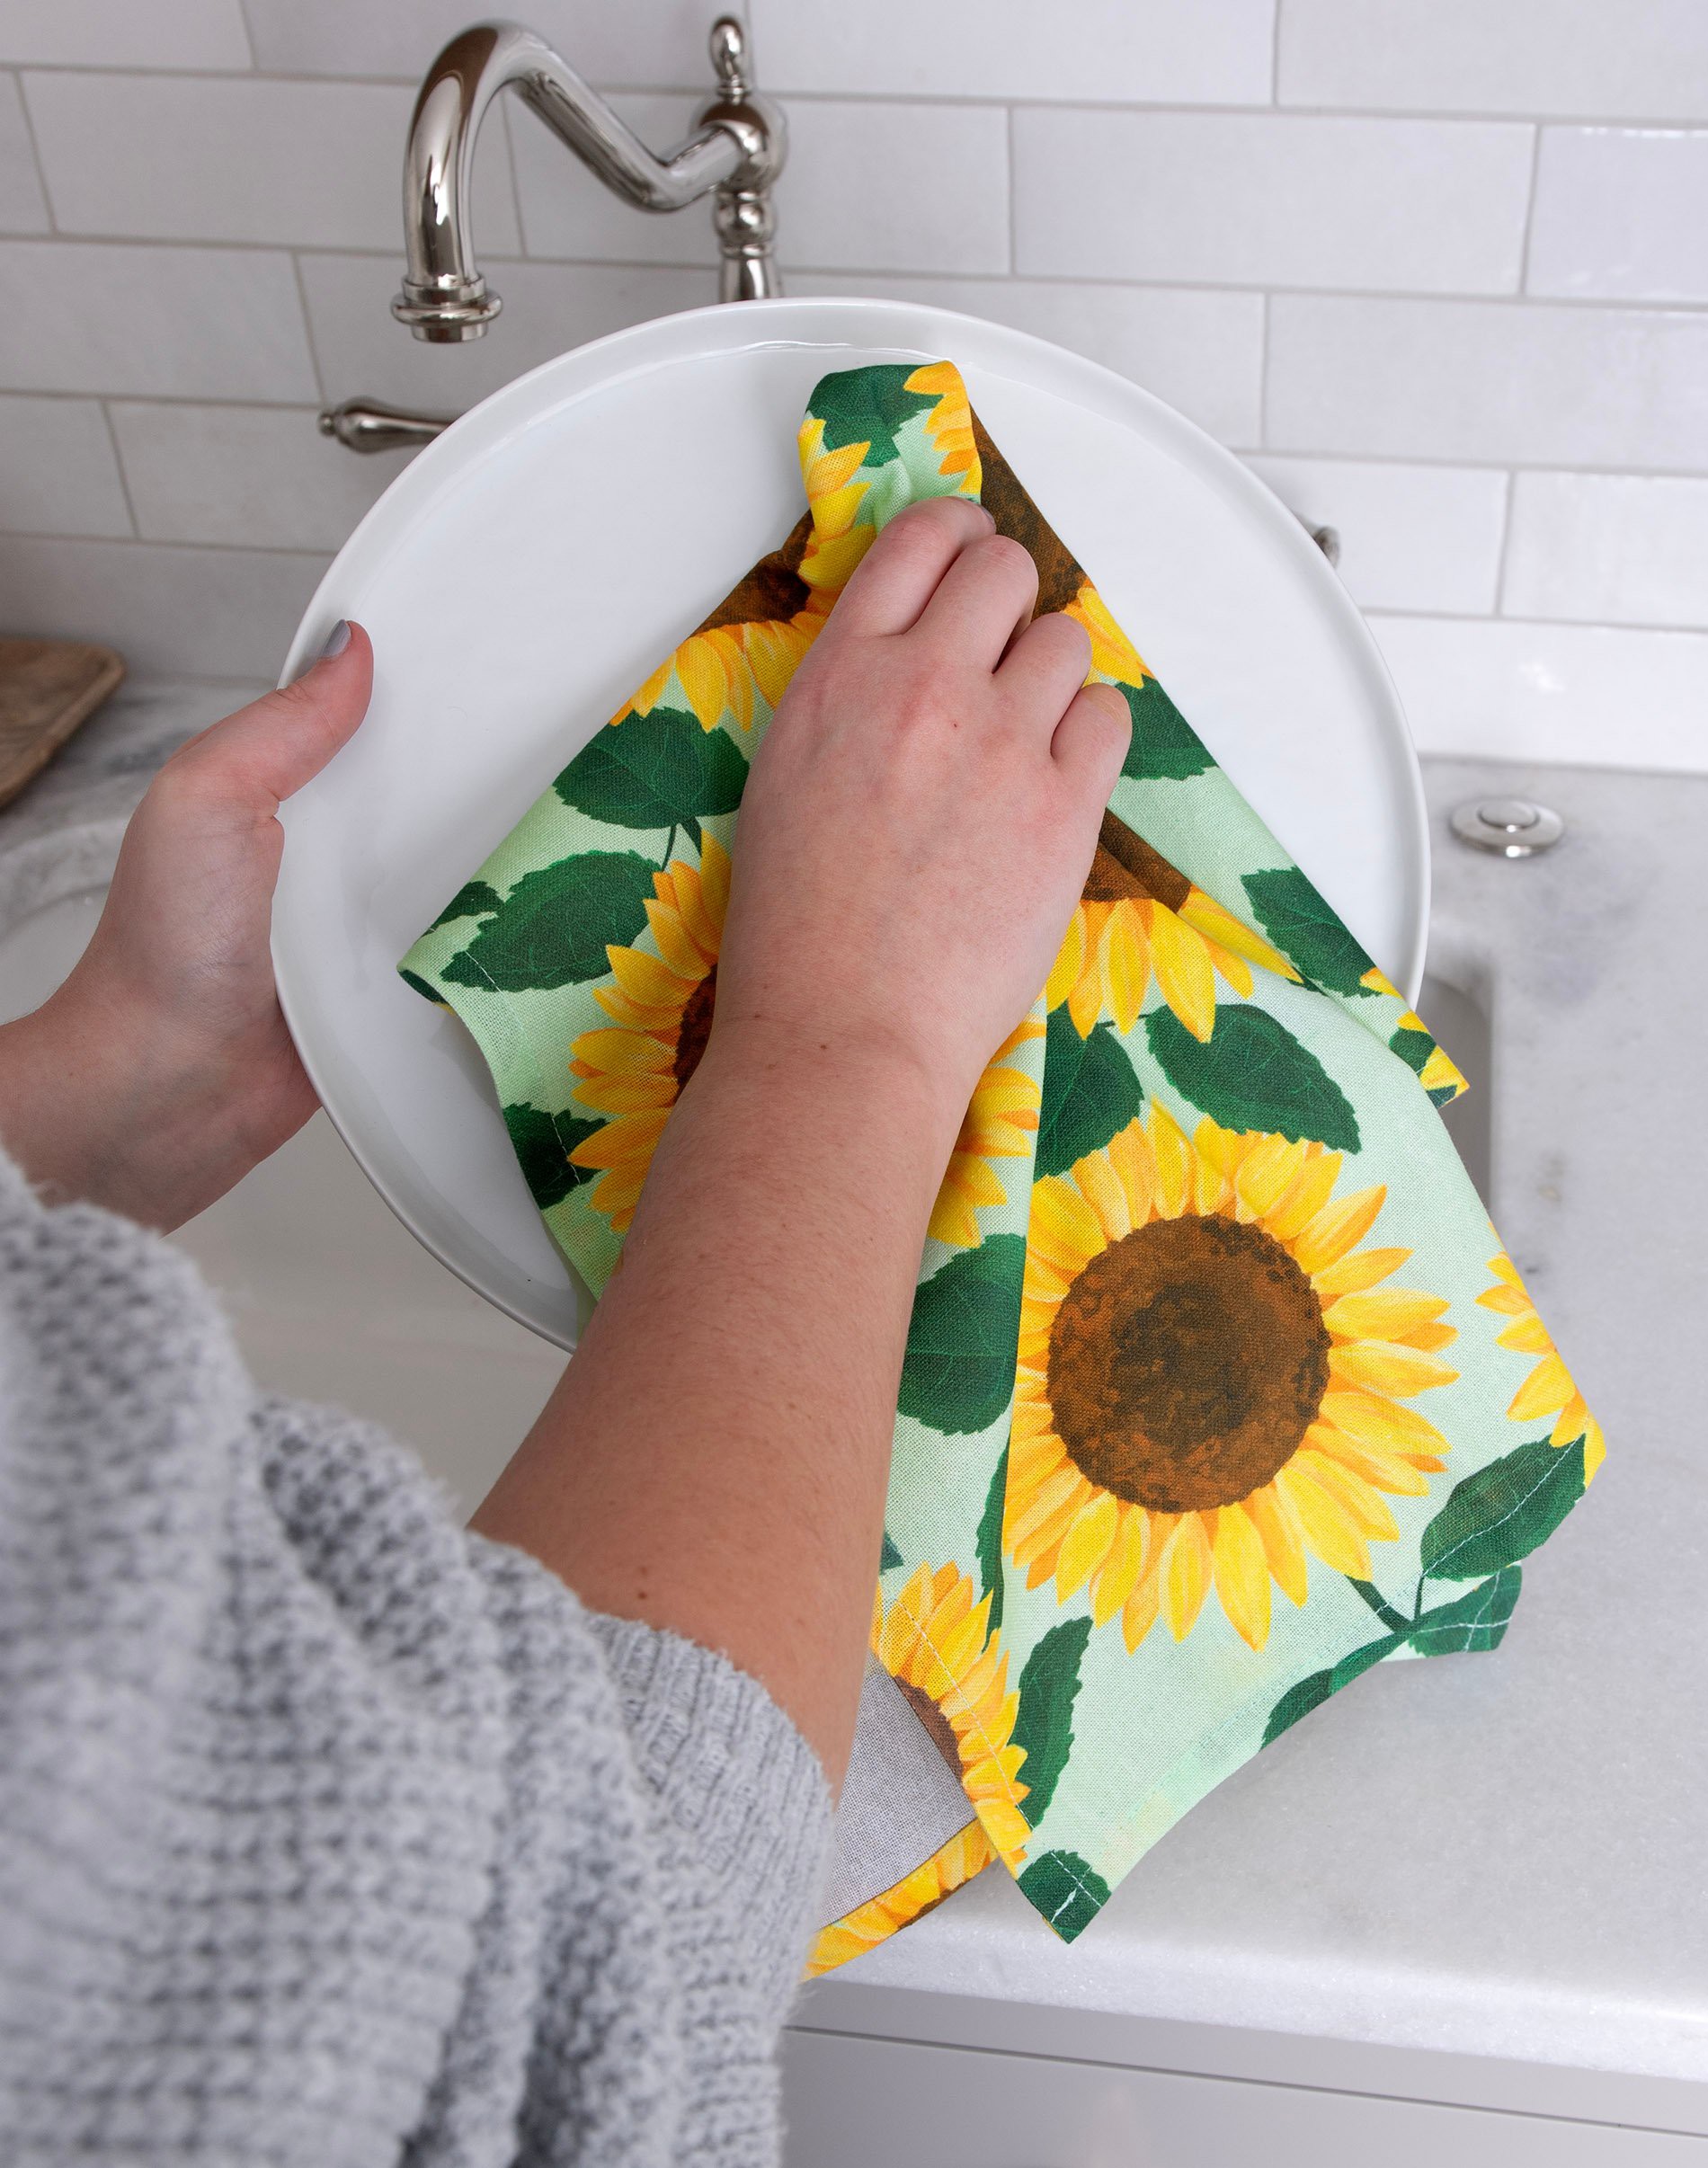 Kitchen Sunflower Dishtowel and Oven Mitts Set, Sunflower Kitchen Décor  and Accessories, Sunflower Tea Towels with Oven Mitts and Pot Holders Sets